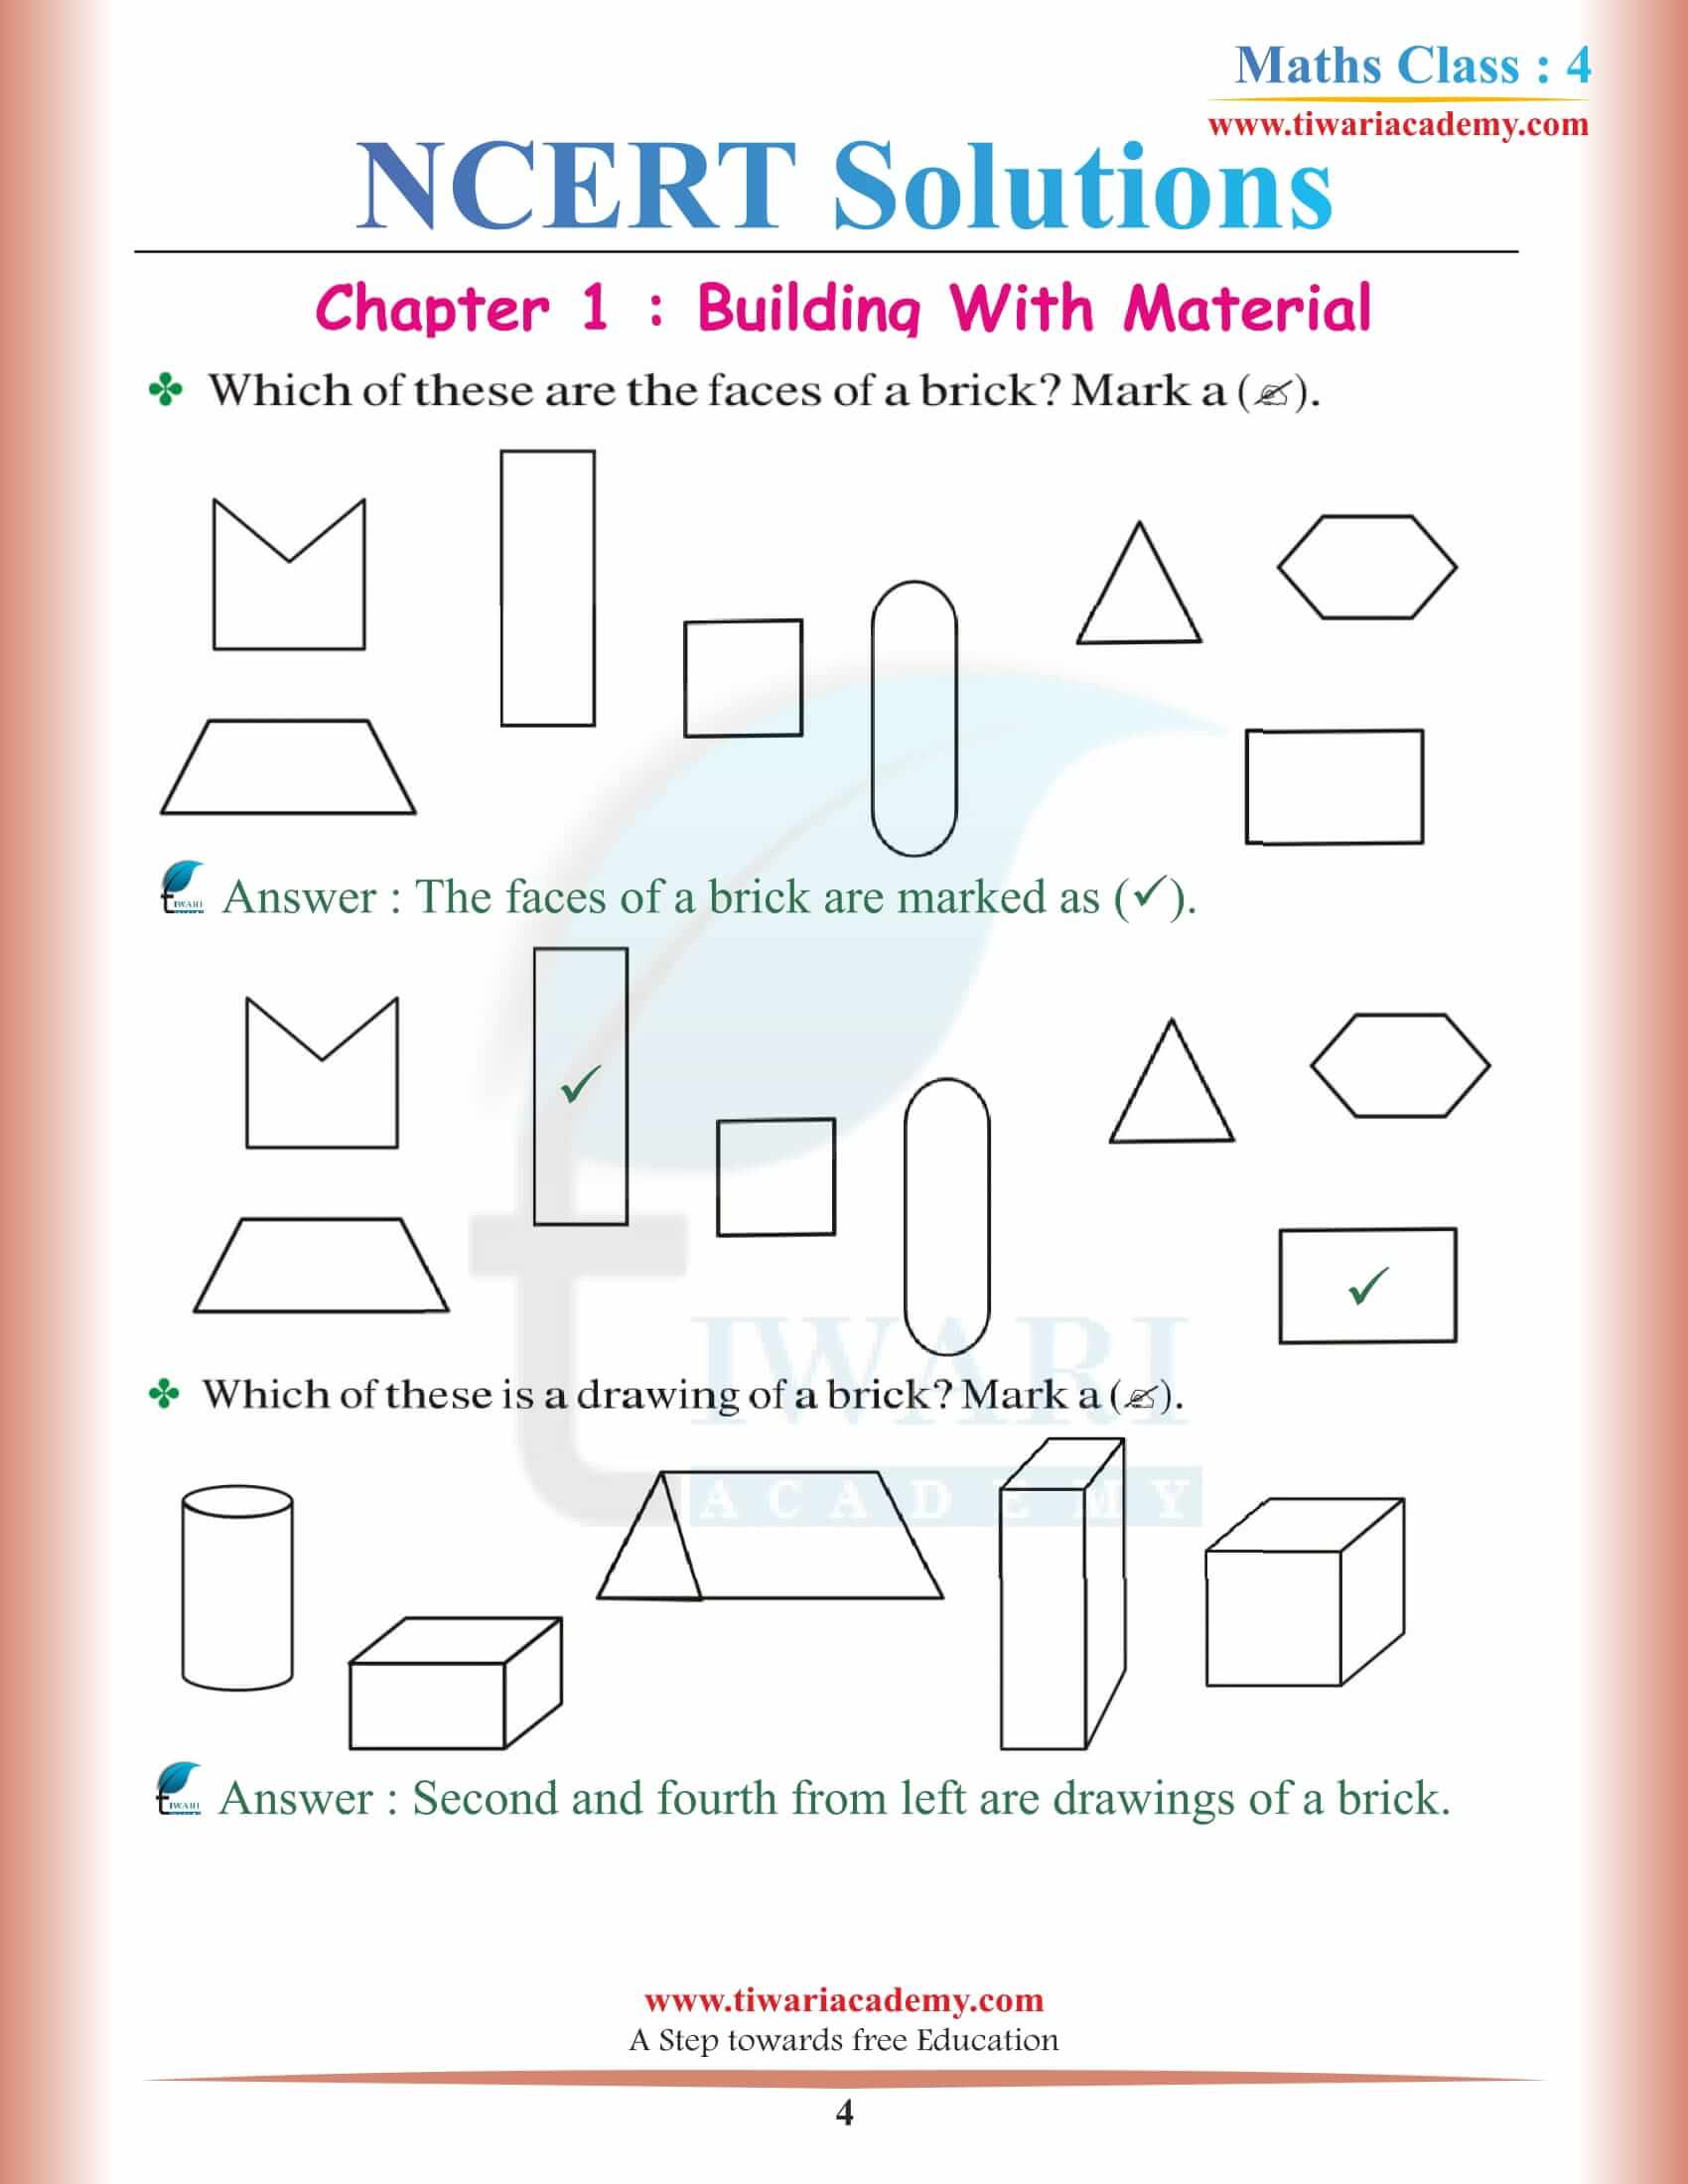 NCERT Solutions for Class 4 Maths Chapter 1 in English Medium